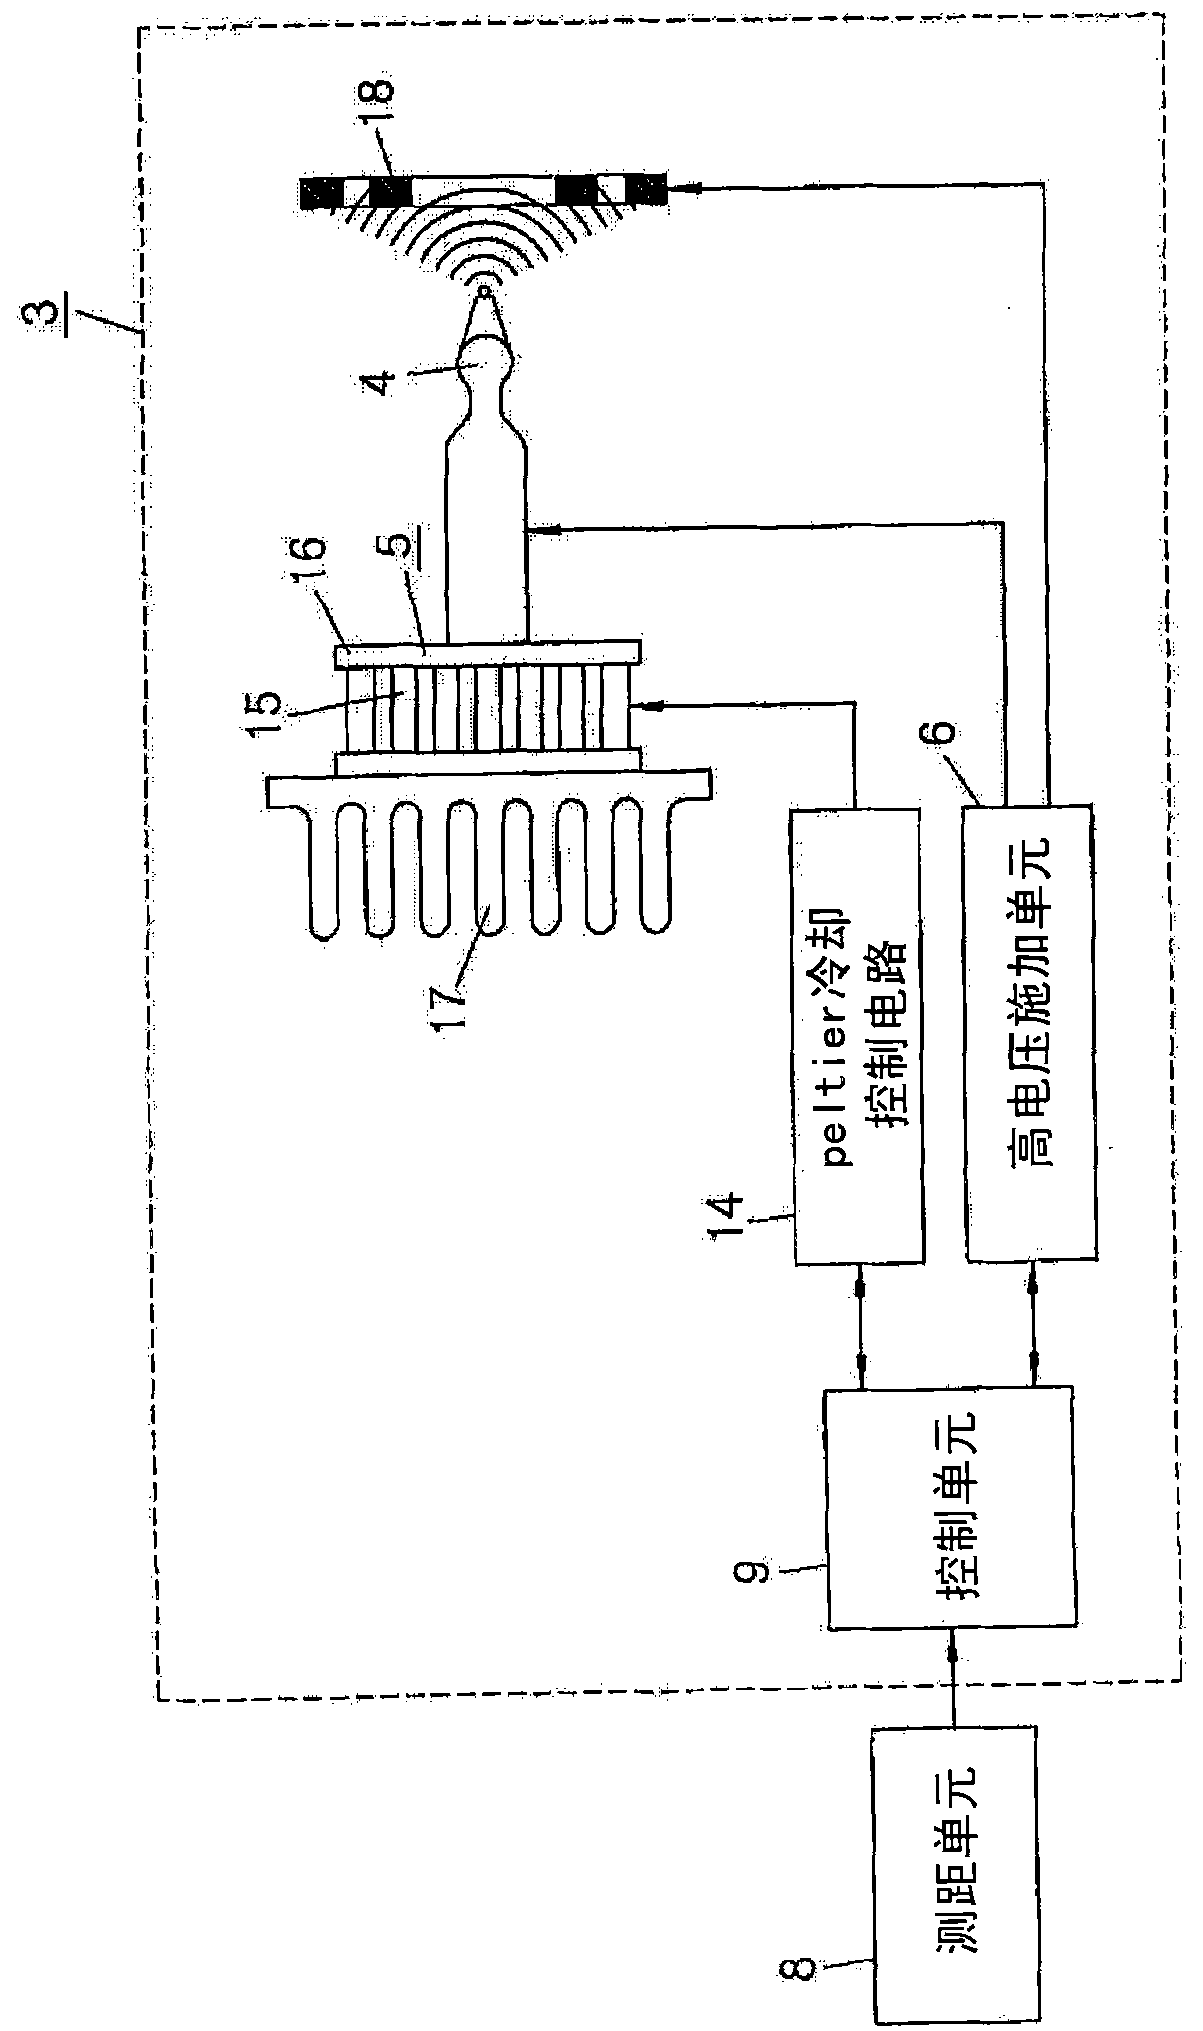 Electrostatic atomizer for use in a motor vehicle